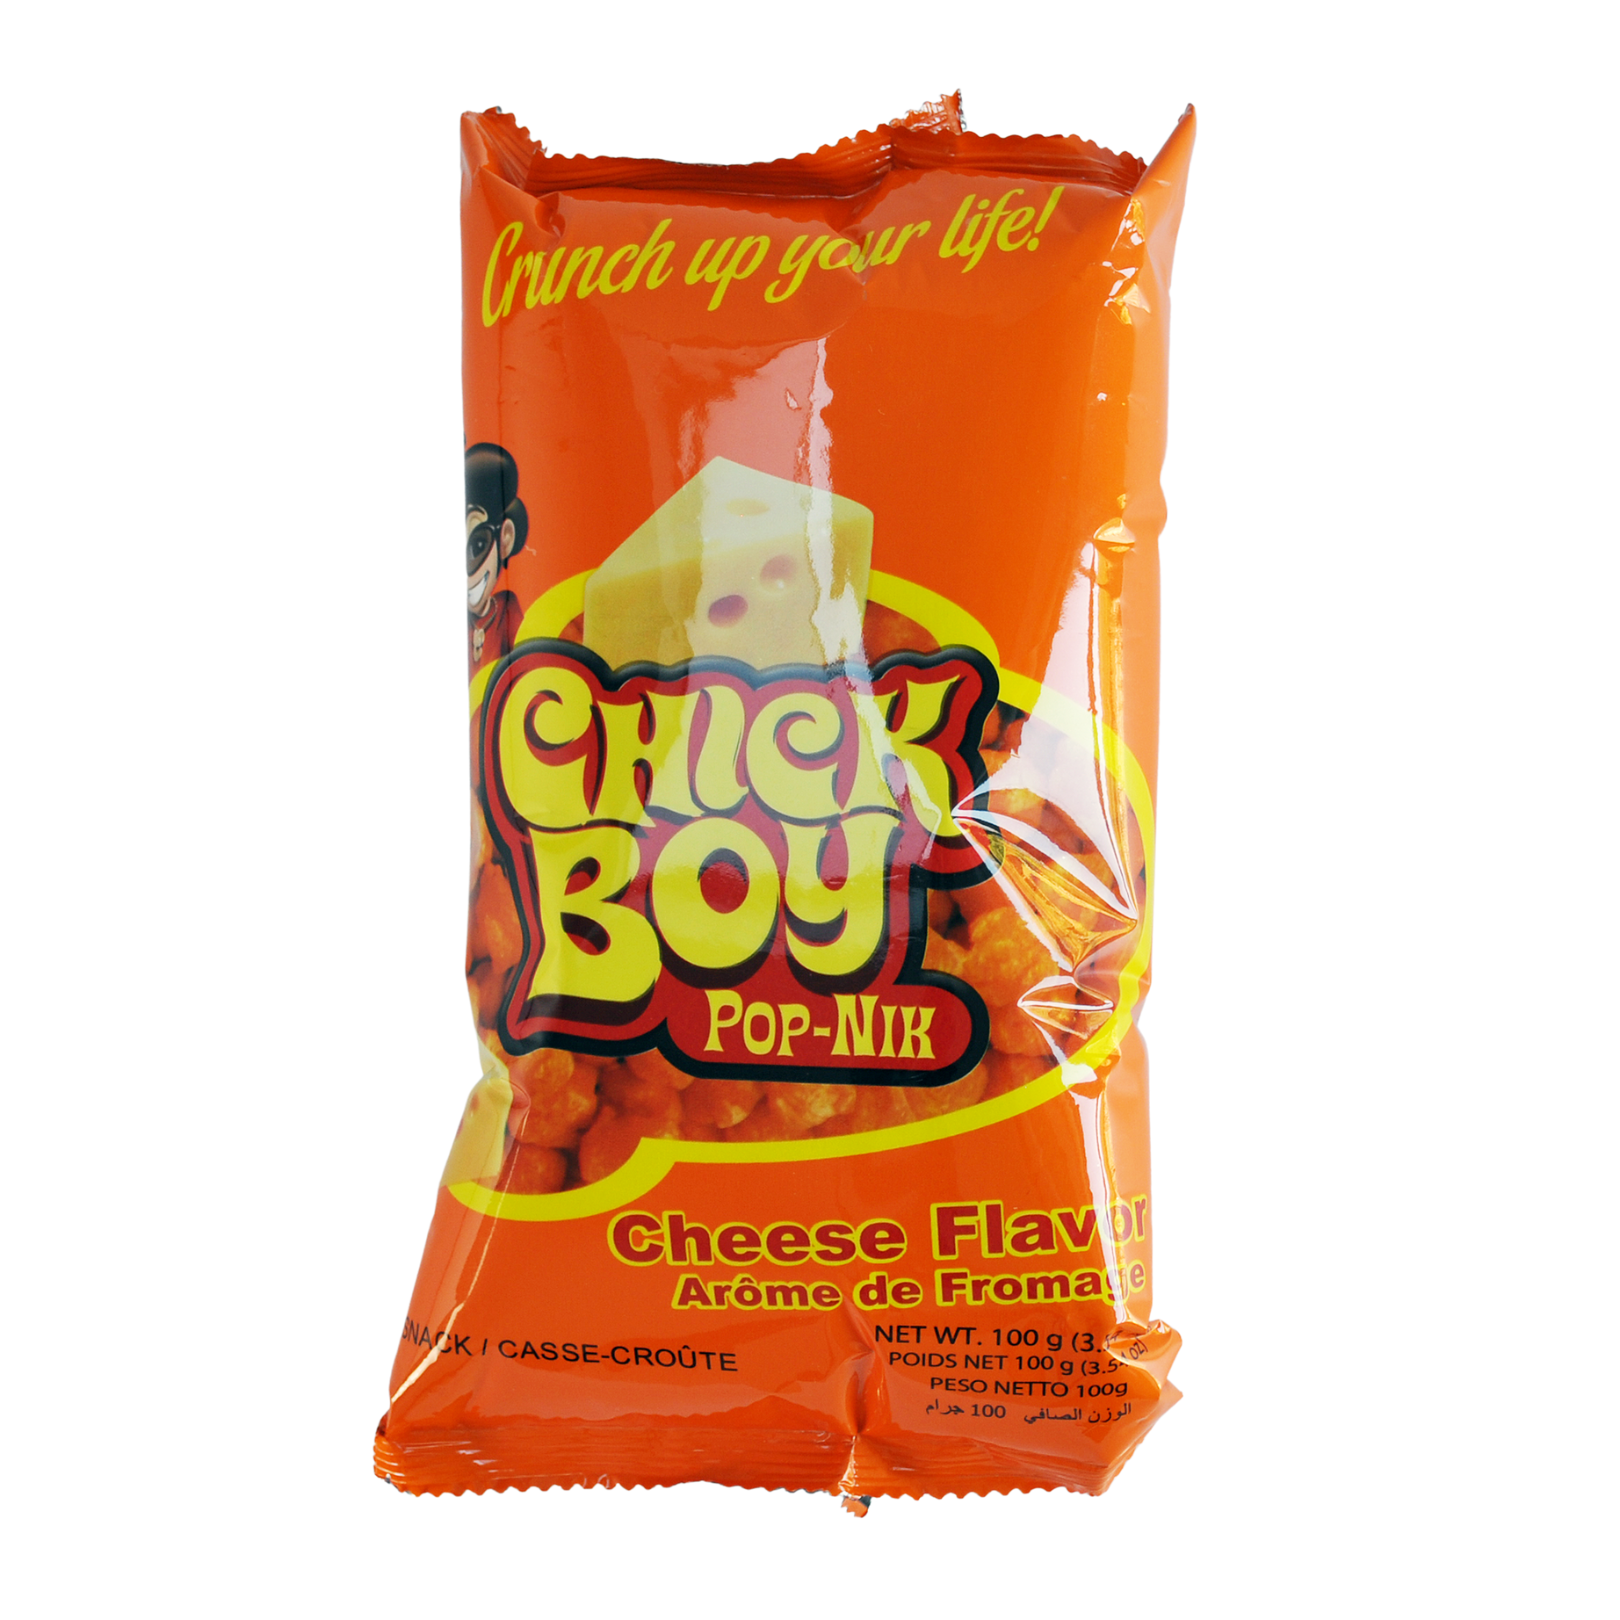 Pop-Niks Corn Snack Cheese Flavour 100g by Hobe Chick Boy